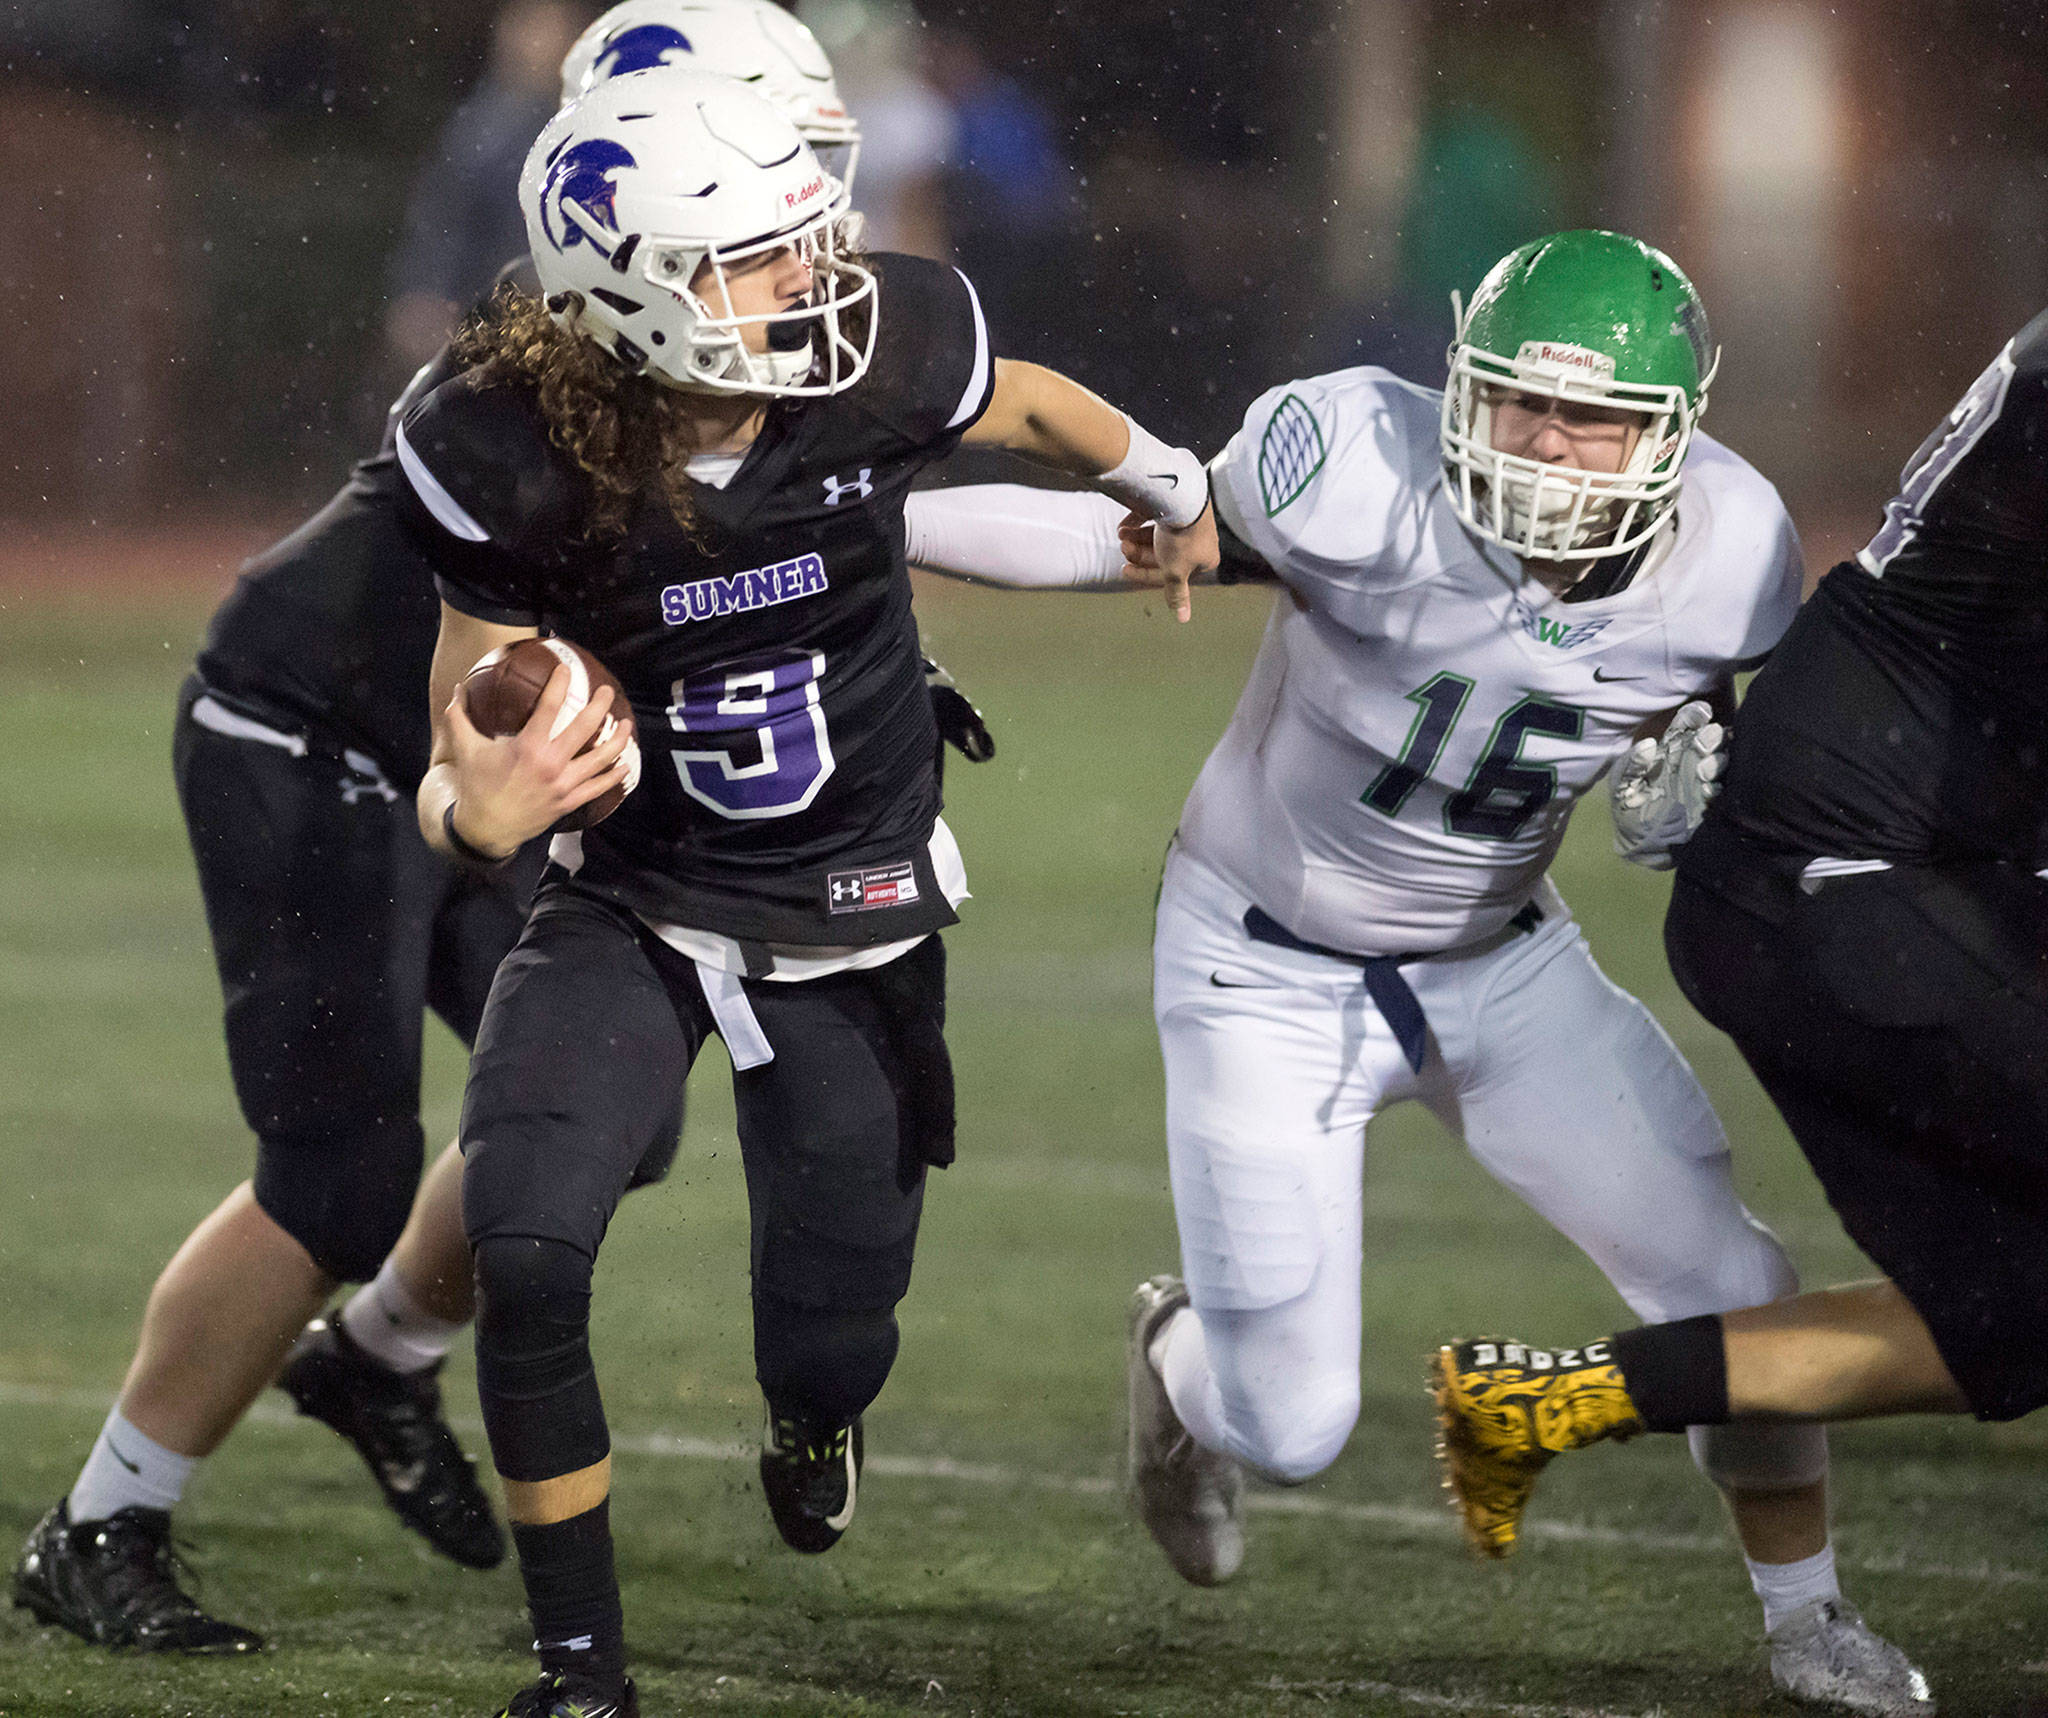 Sumner High quarterback Luke Ross eludes Woodinville defenders during Saturday’s state semifinal at Sparks Stadium in Puyallup. &lt;a href="http://www.vincemillerphoto.com/" target="_blank"&gt;Photo by Vince Miller &lt;/a&gt;